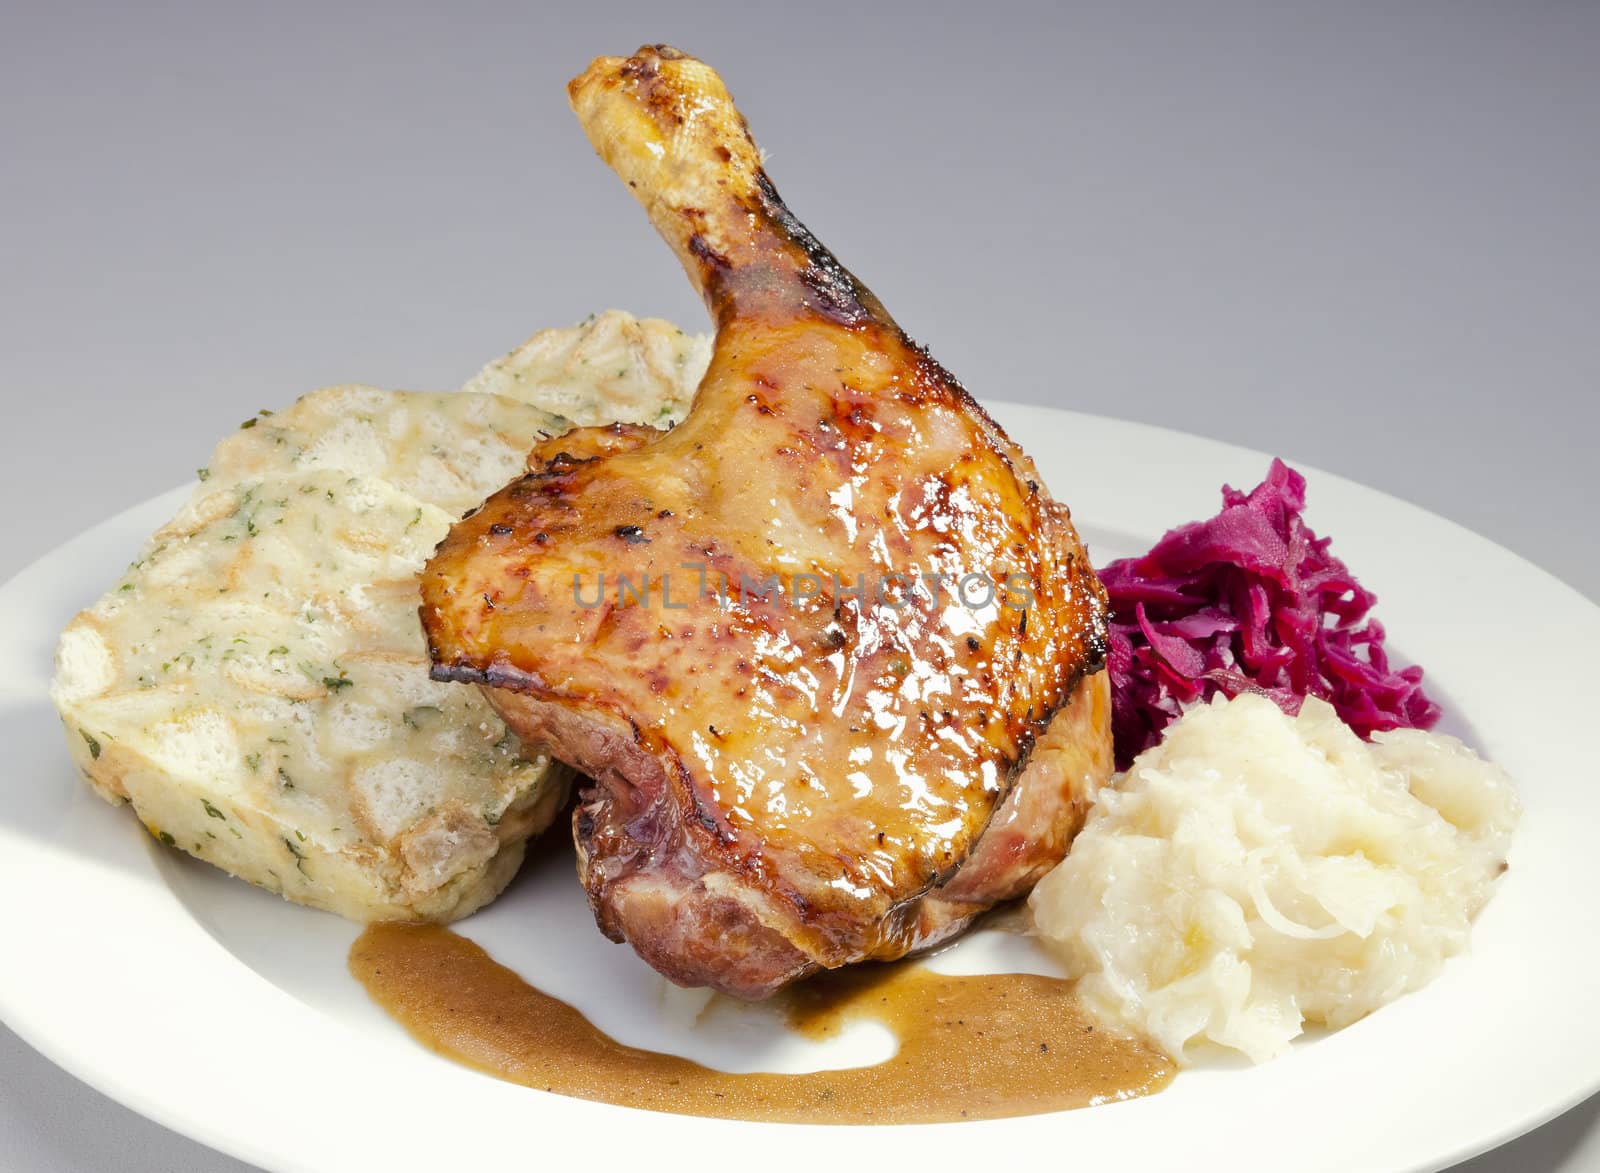 Baked duck with red and white cabbage and dumplings